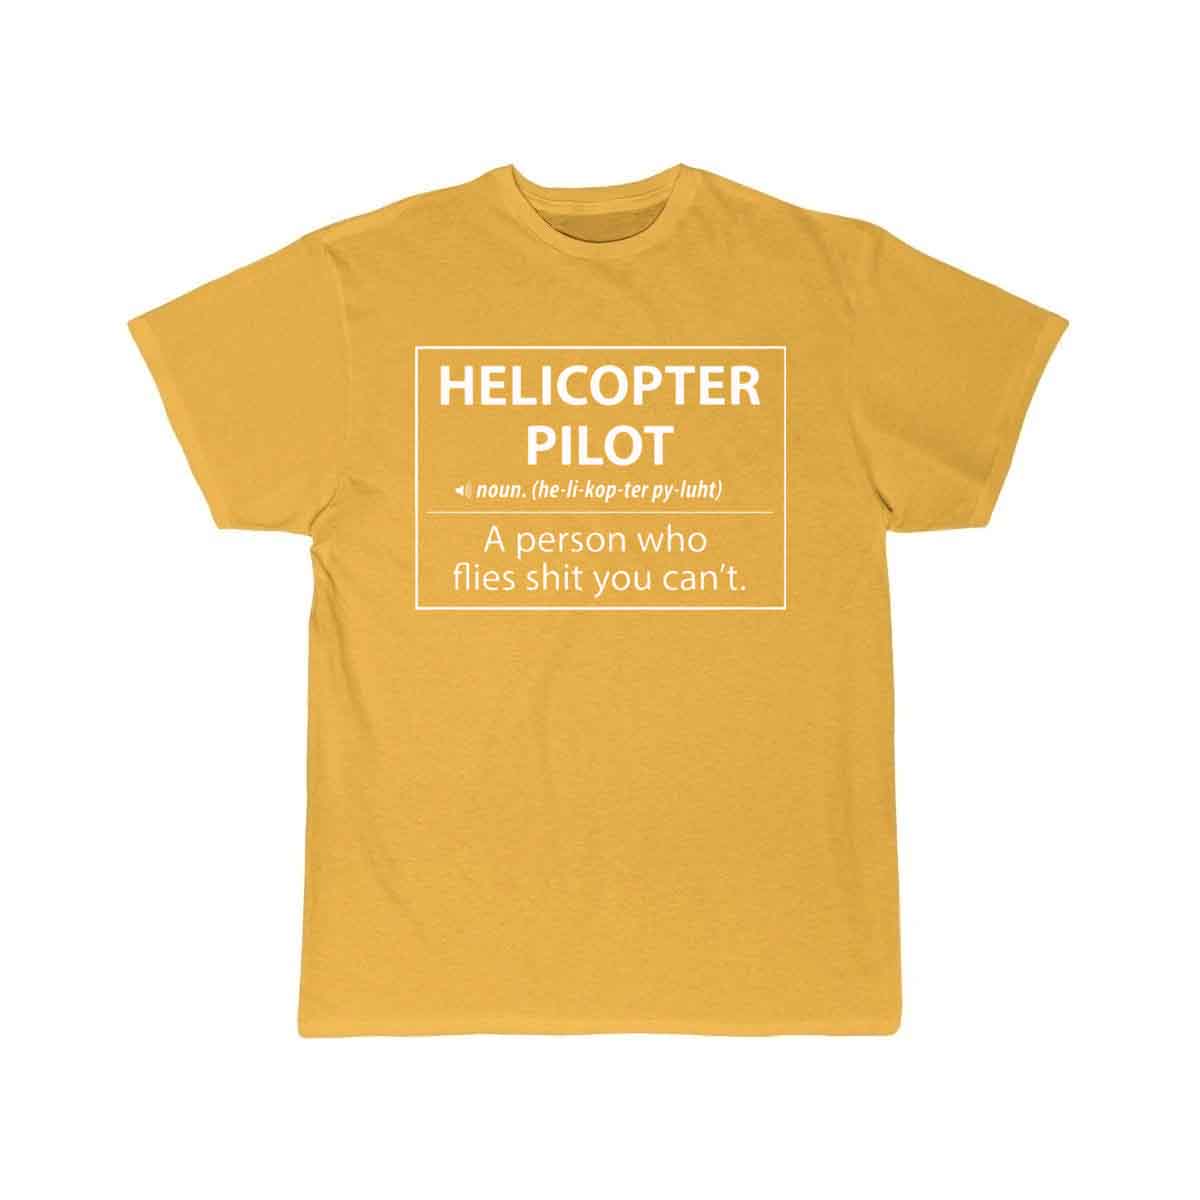 Helicopter Pilot a person who flies shit you can't T-SHIRT THE AV8R